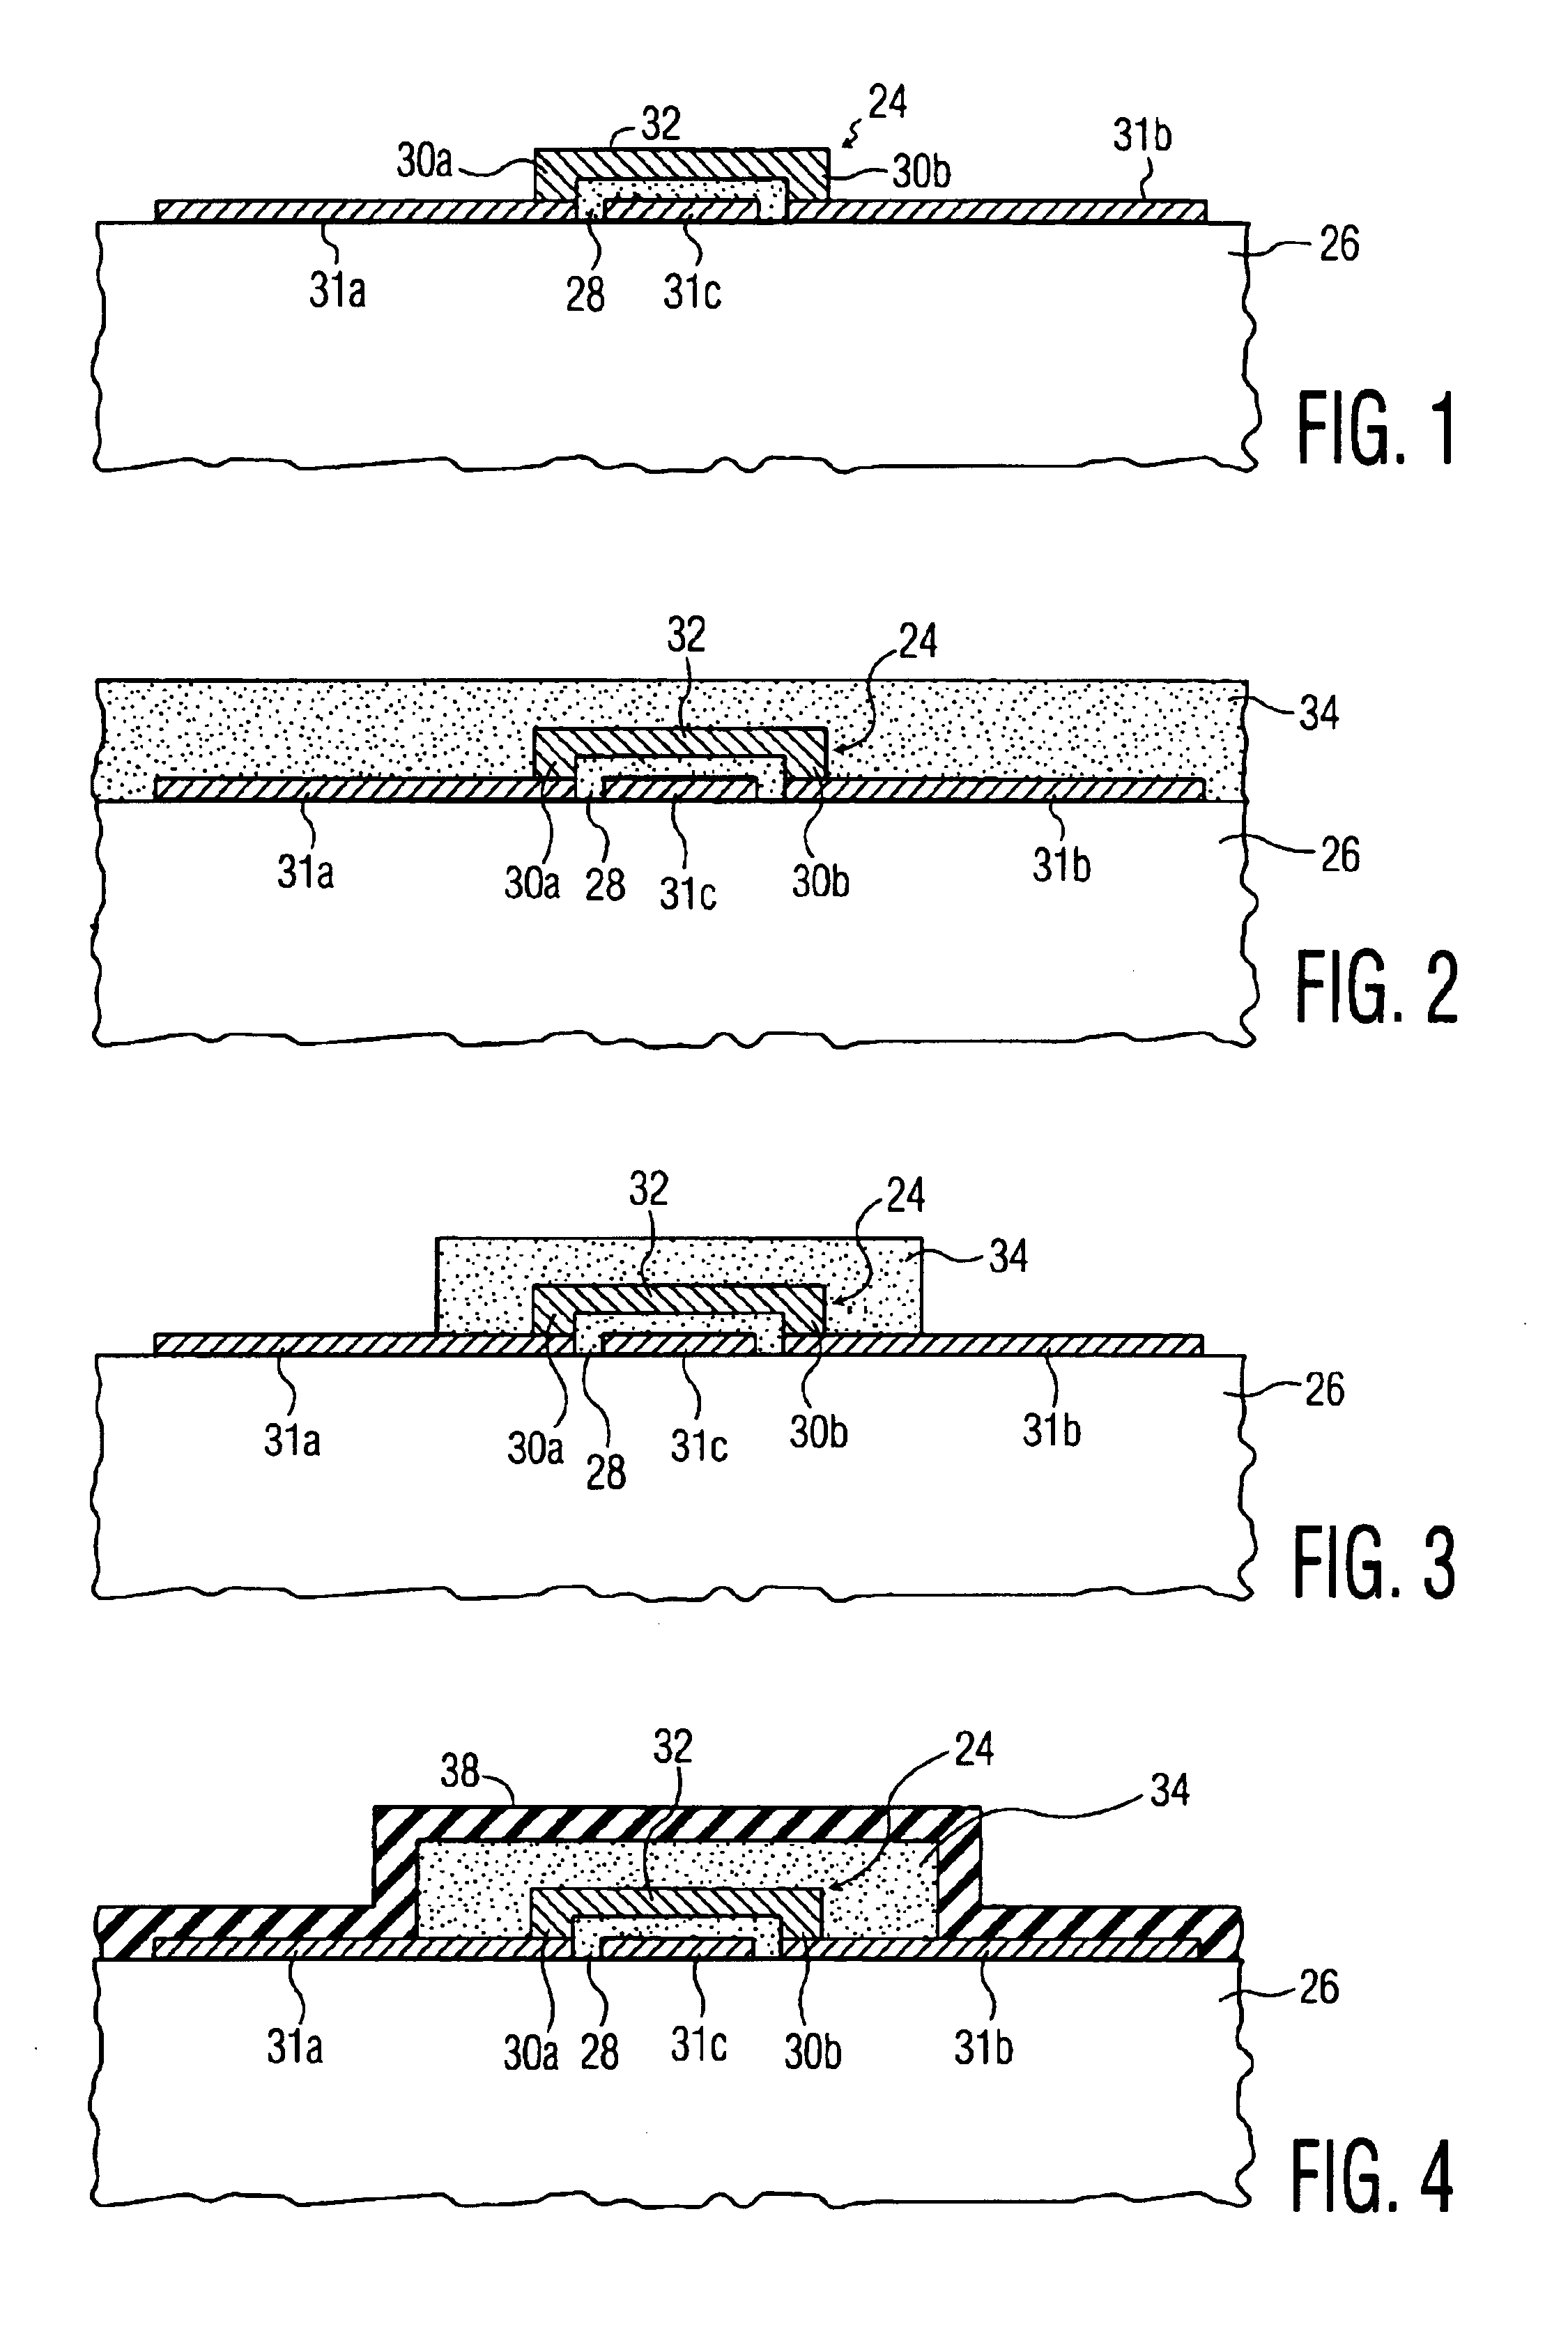 Processes for hermetically packaging wafer level microscopic structures